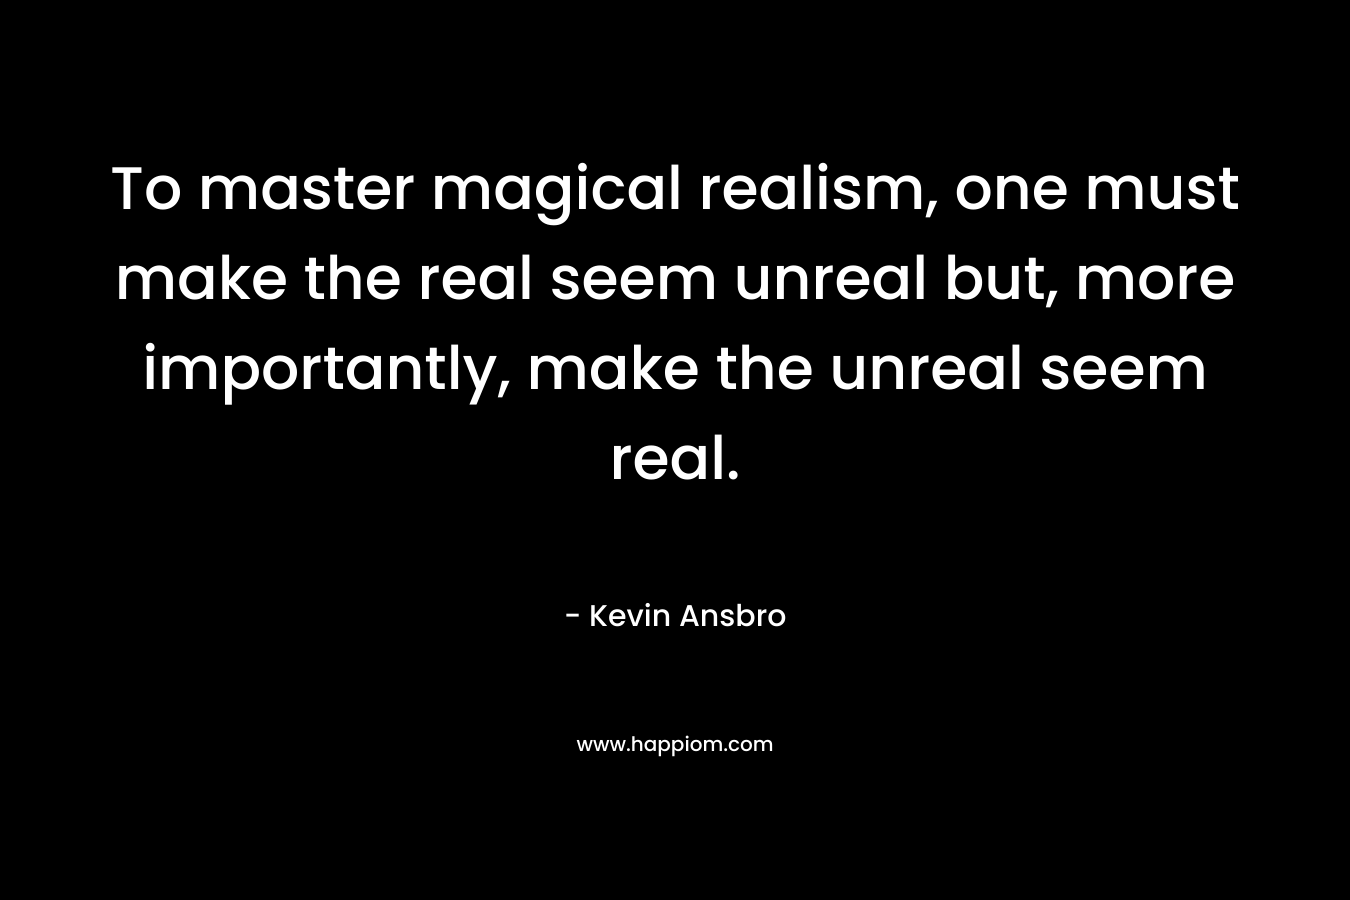 To master magical realism, one must make the real seem unreal but, more importantly, make the unreal seem real.